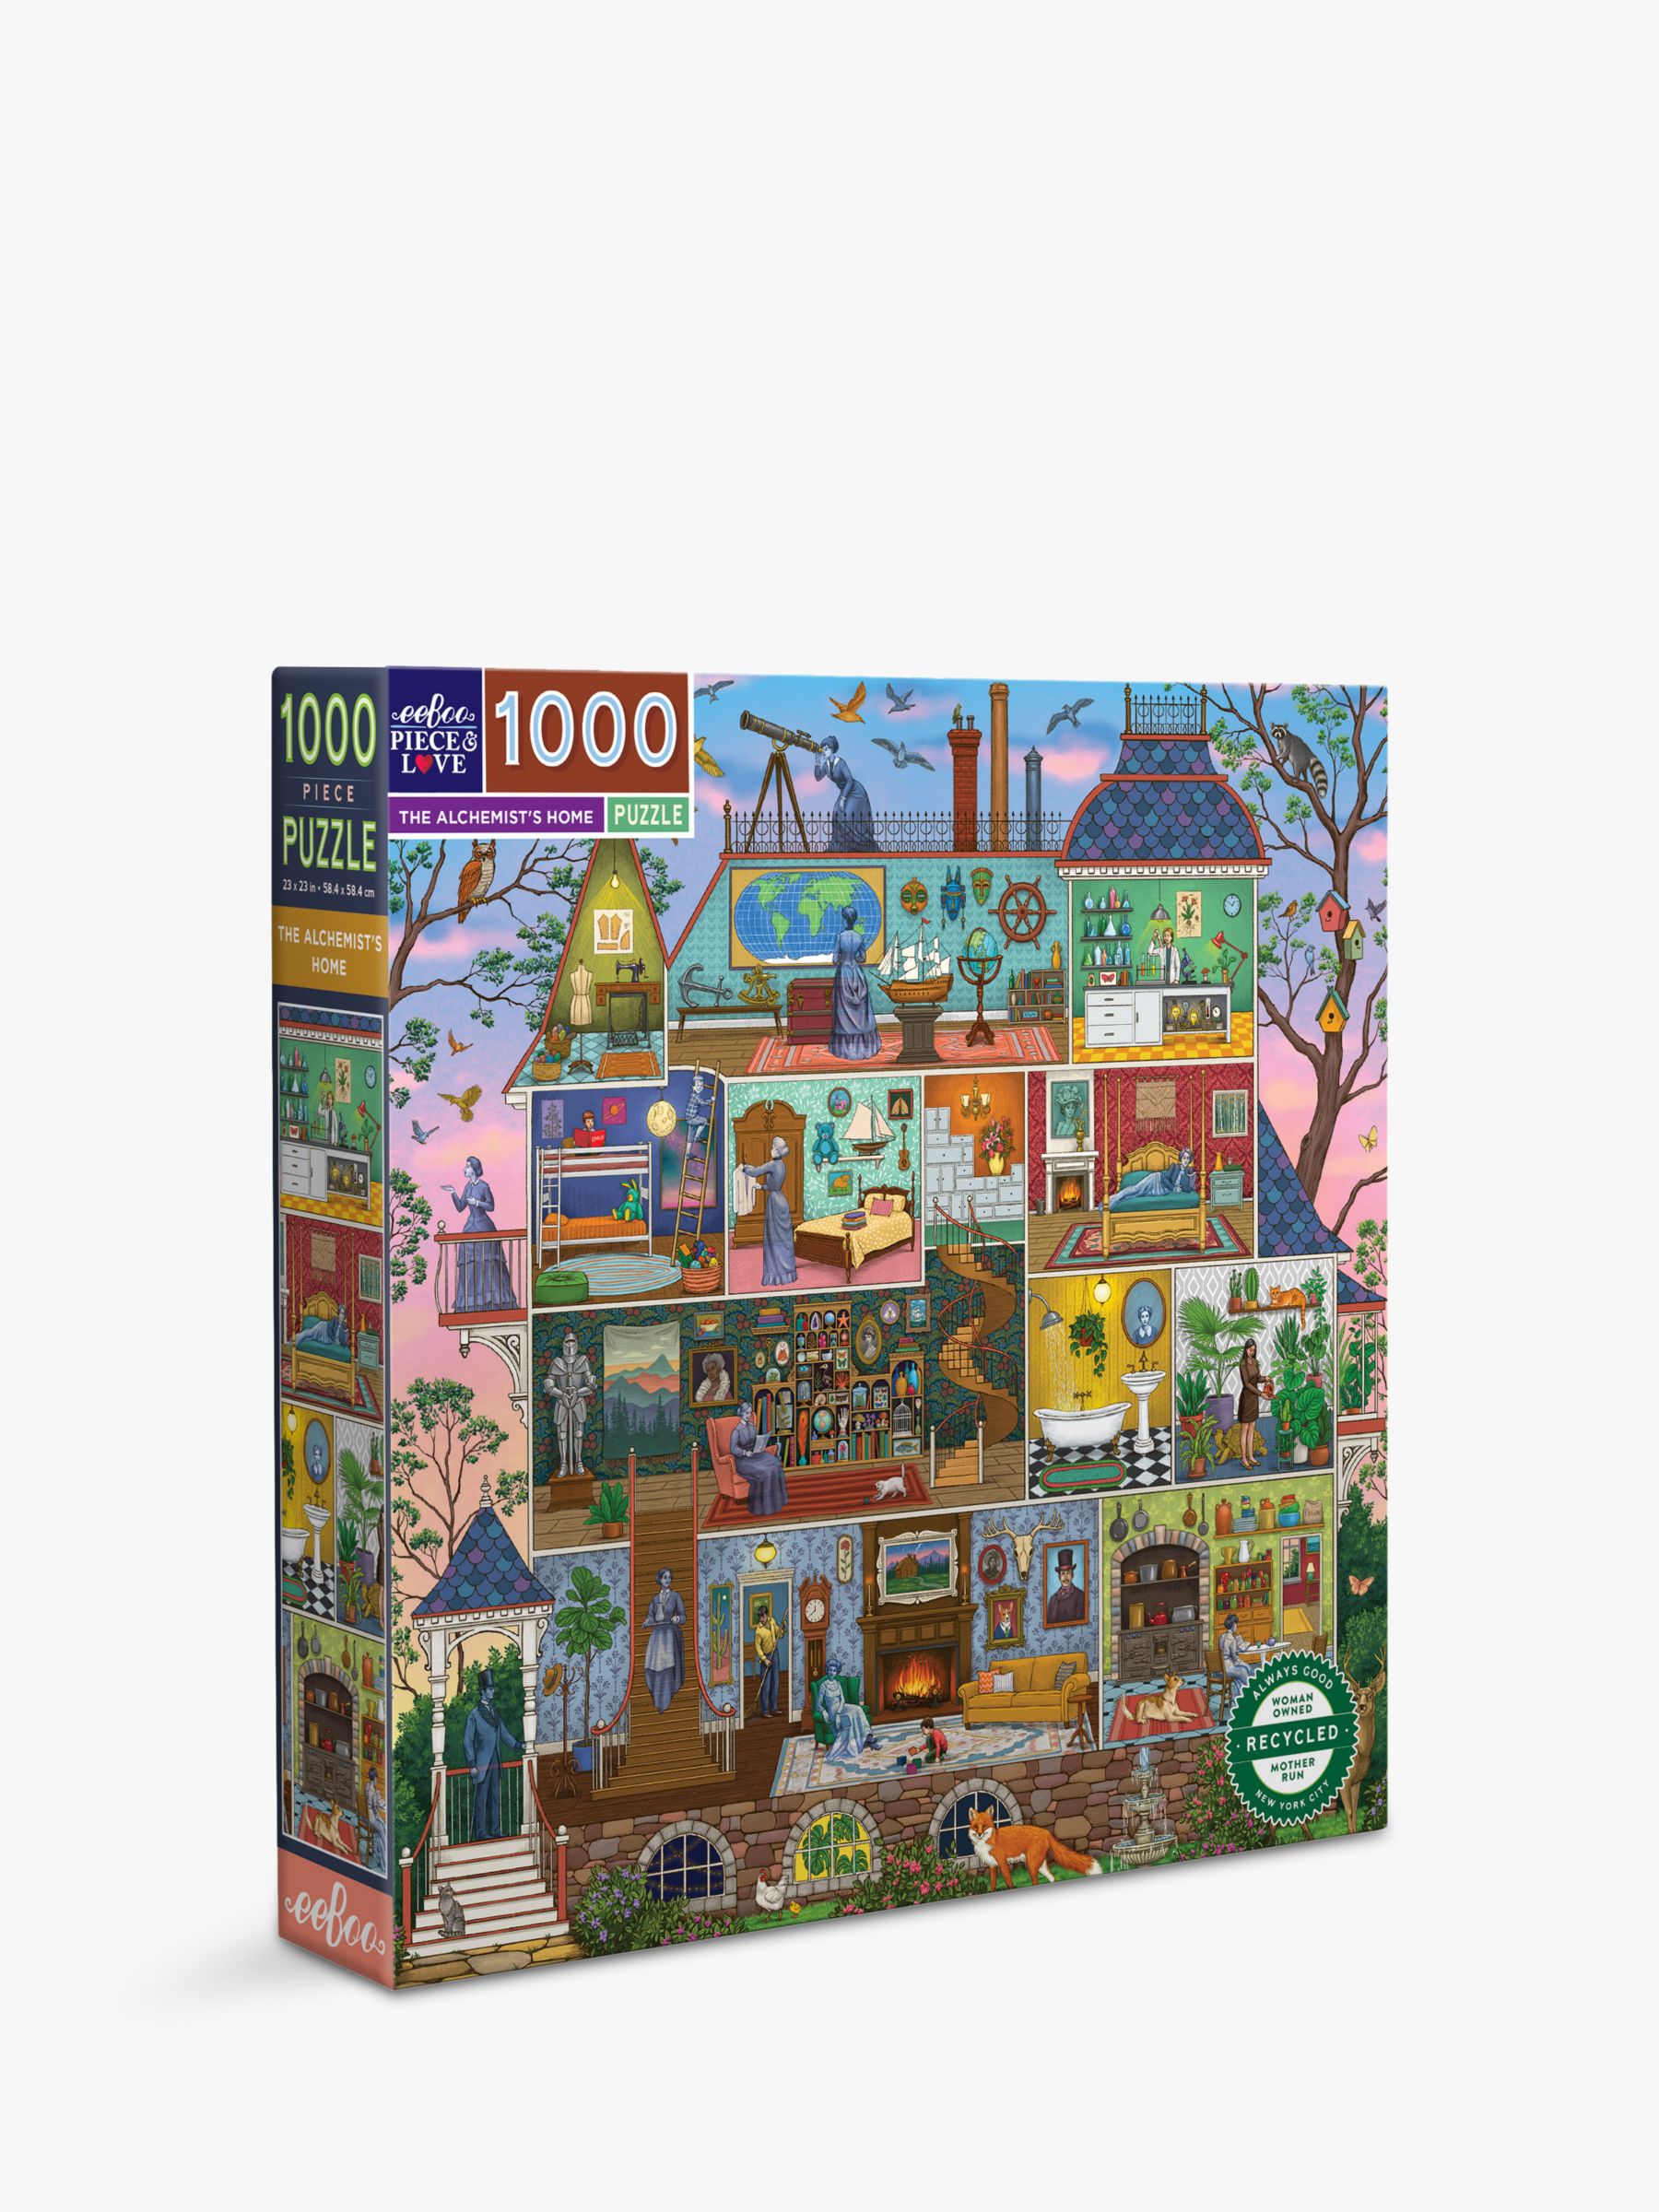 Michael Storrings New York Public Library 1000 Piece Jigsaw Puzzle